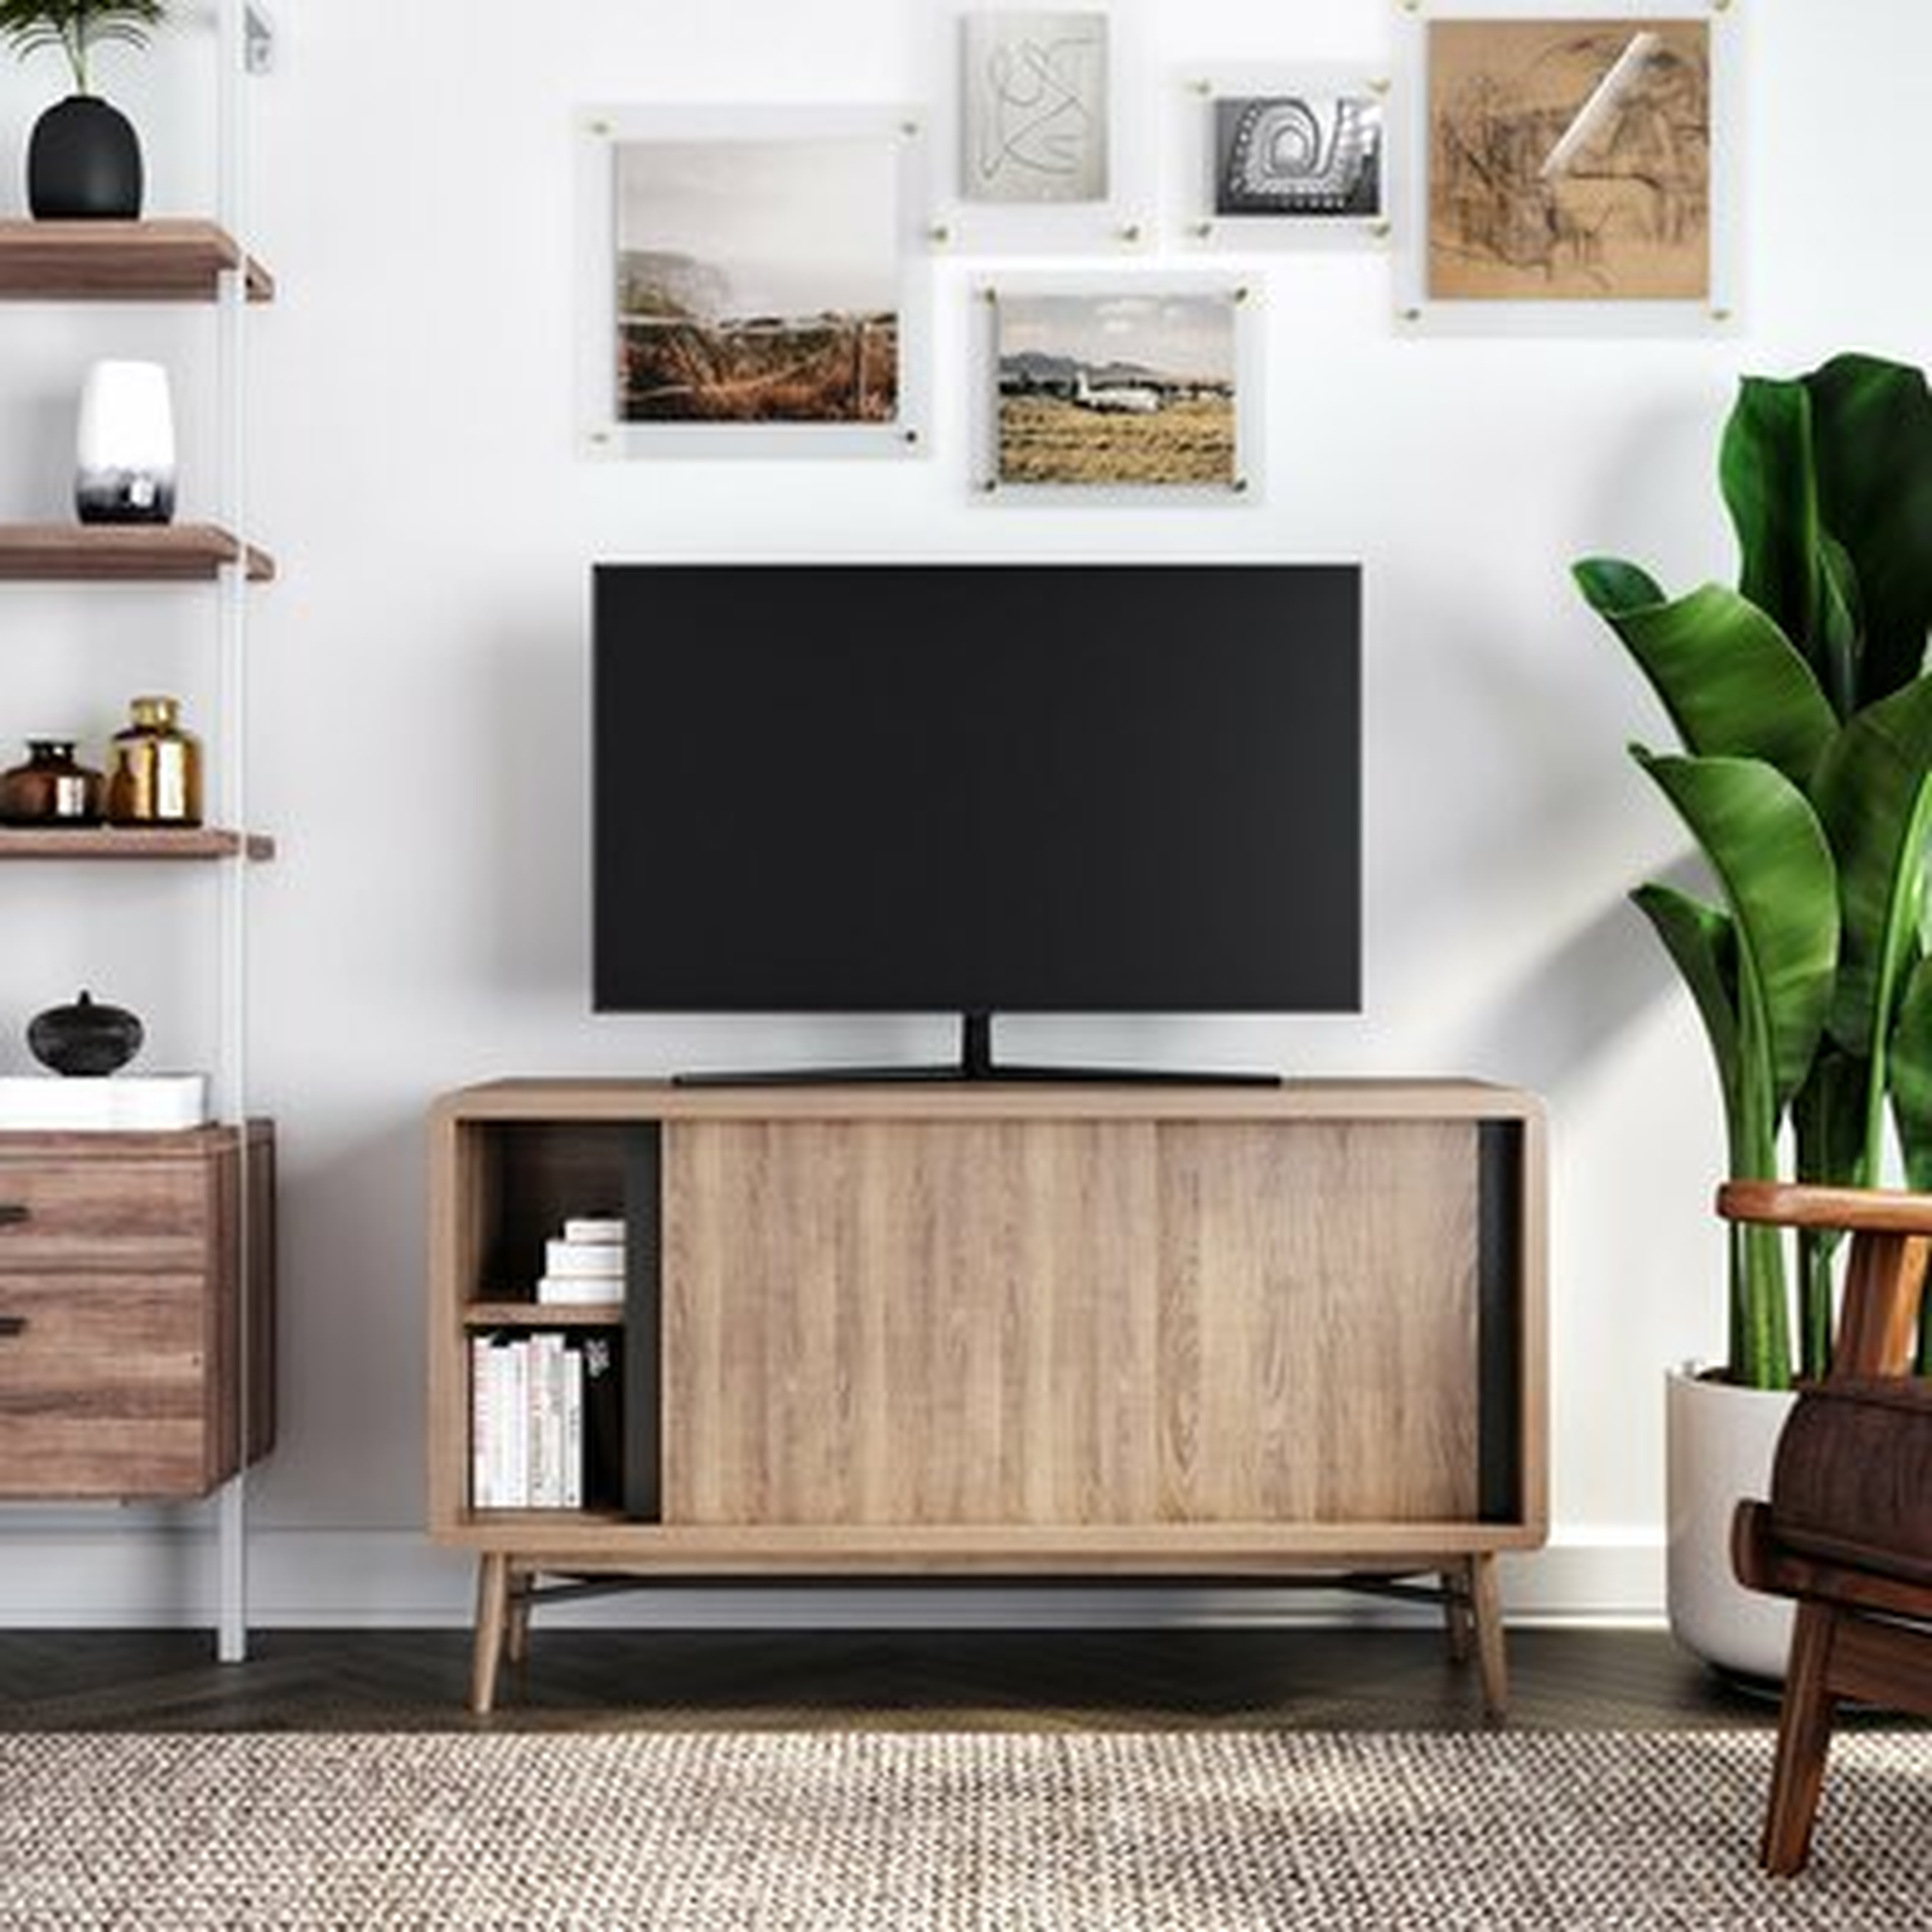 Summerdale TV Stand for TVs up to 49" - Wayfair